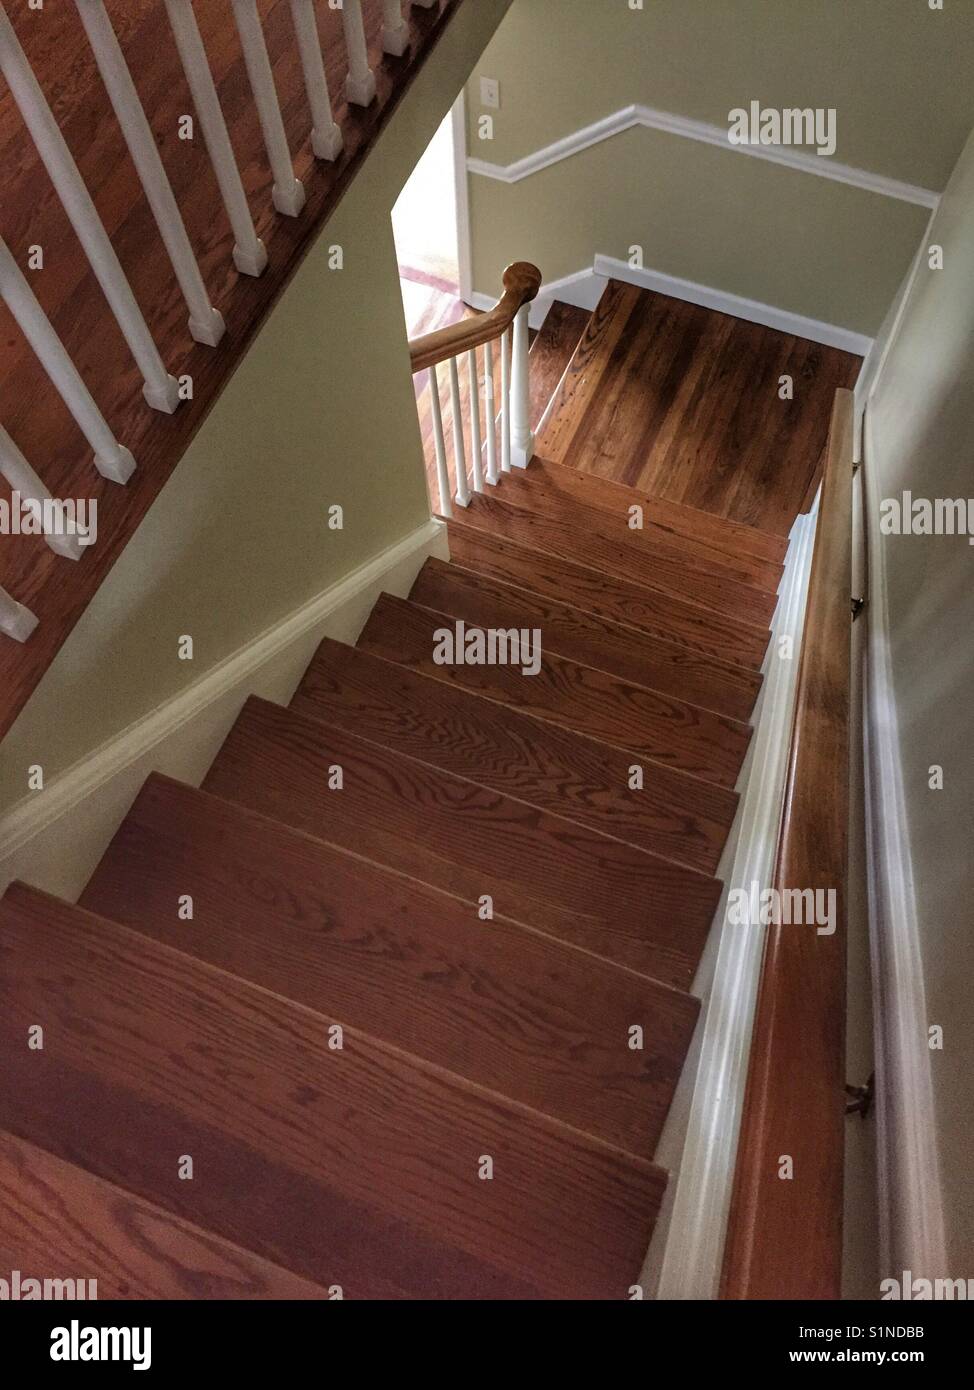 https://c8.alamy.com/comp/S1NDBB/a-descending-wooden-staircase-viewed-from-above-S1NDBB.jpg